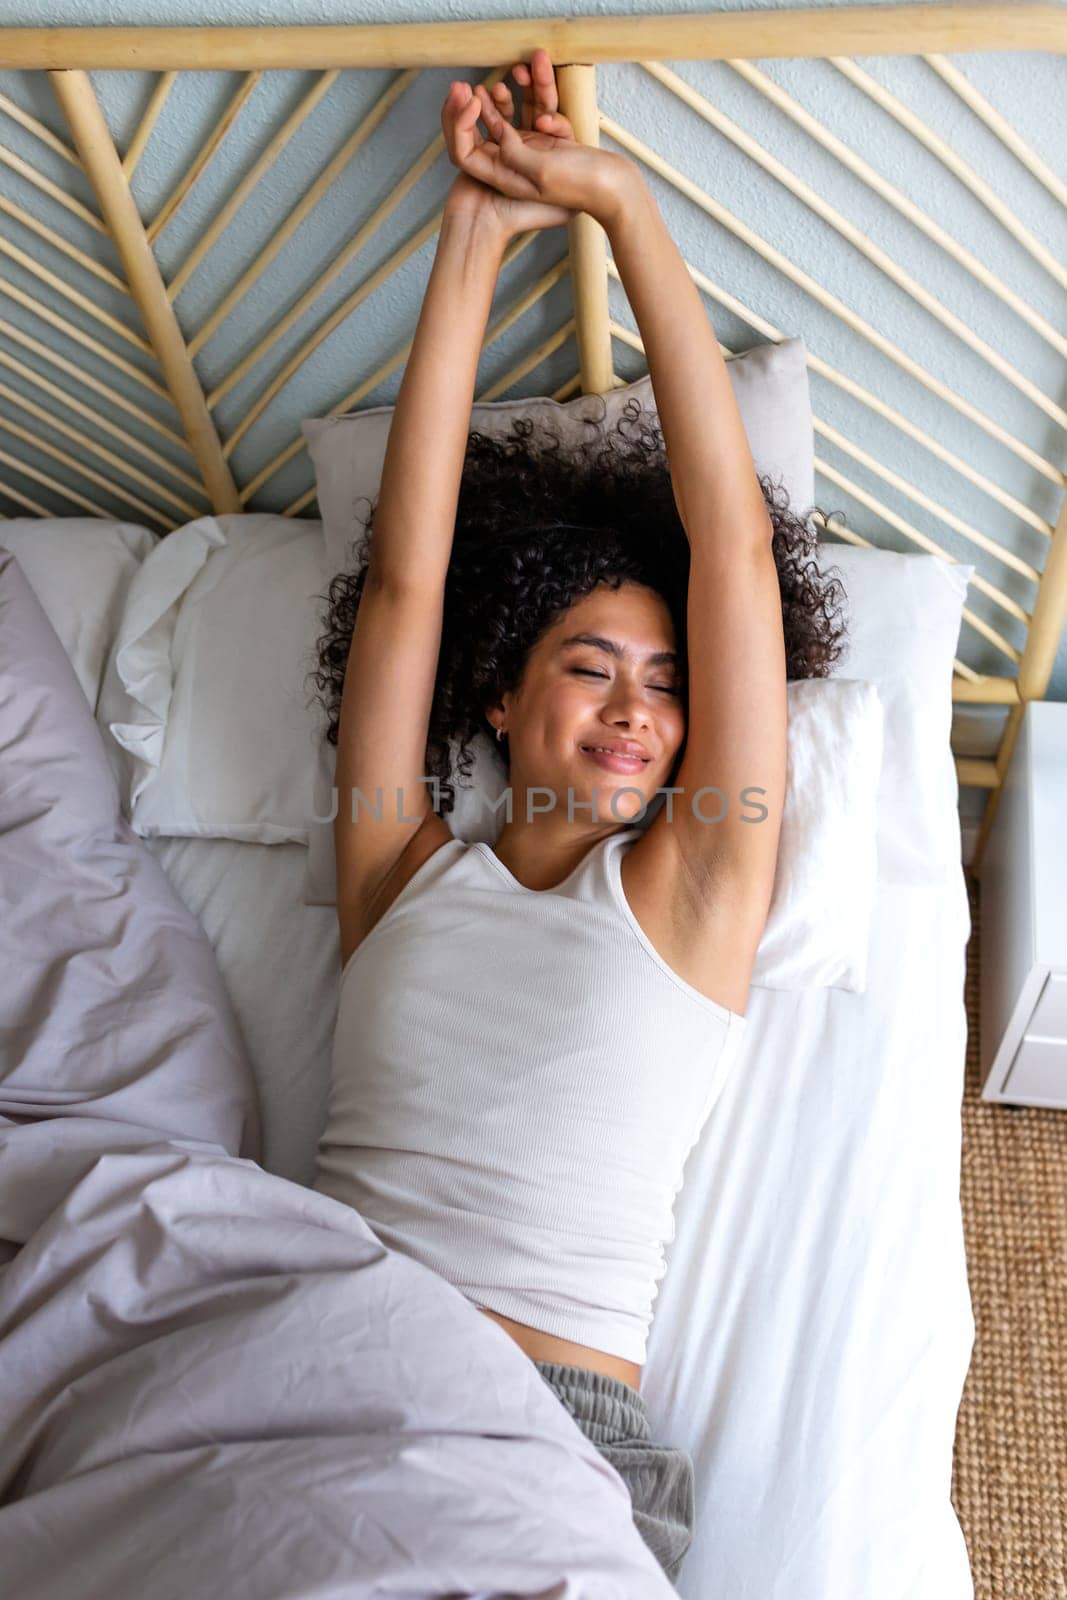 Young African American woman waking up in the morning, stretching arms in bed. Good morning. Vertical image. Lifestyle concept.